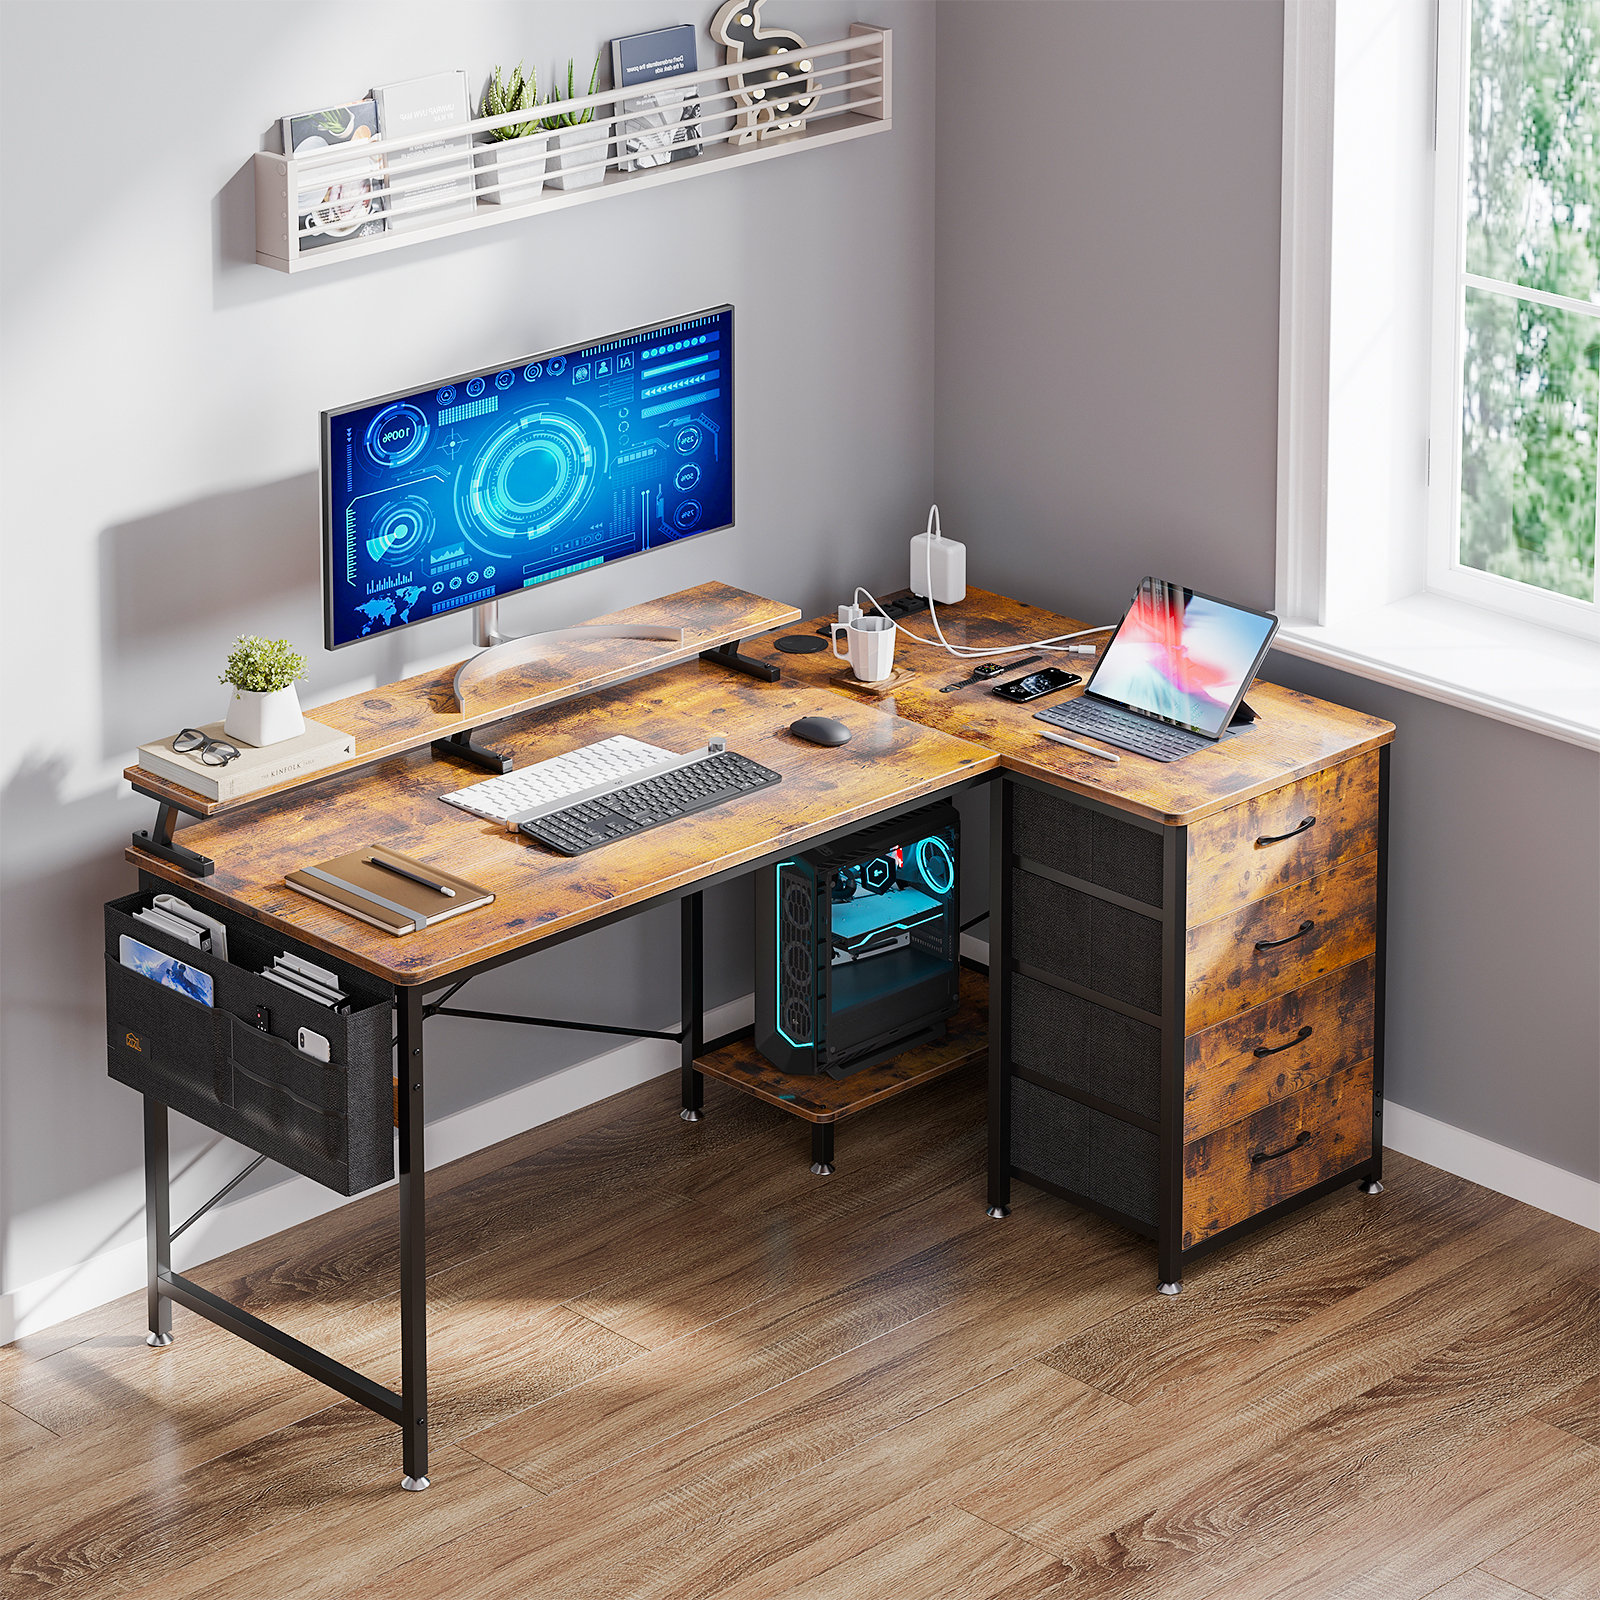 63 Computer Desk with Drawers, Office Desk with Keyboard Tray and